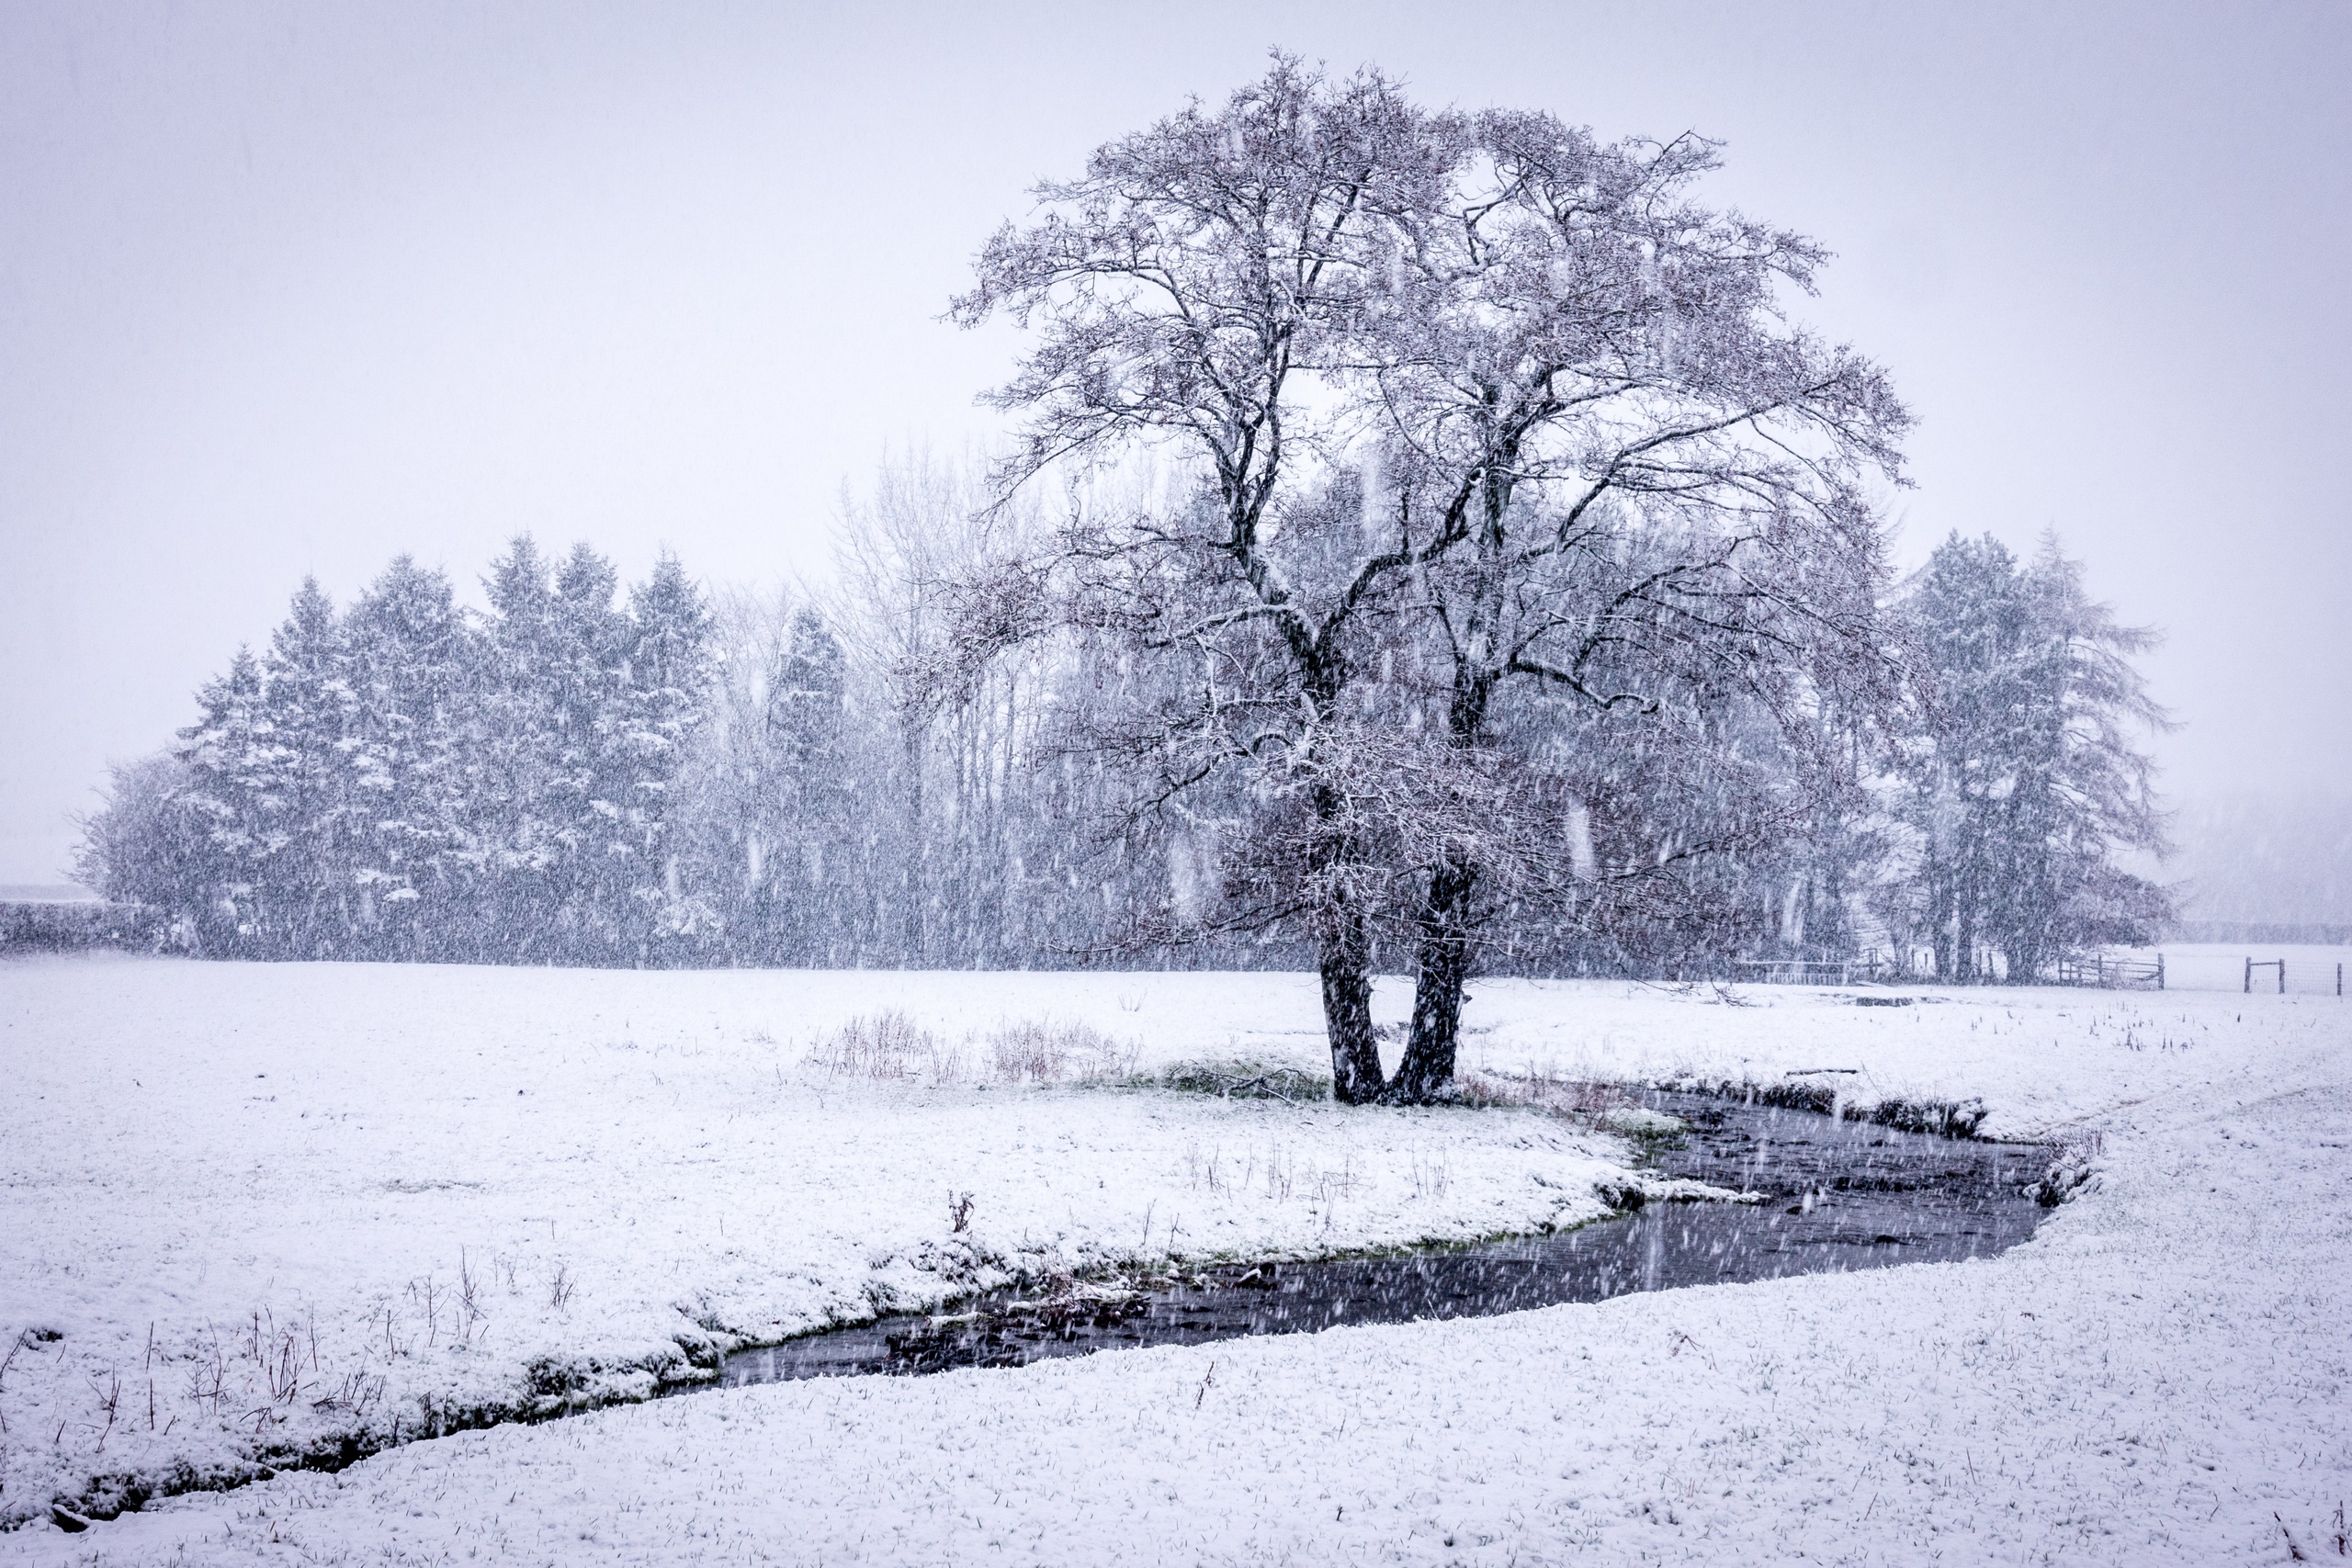 General 2560x1707 trees winter snow landscape snowing river overcast nature